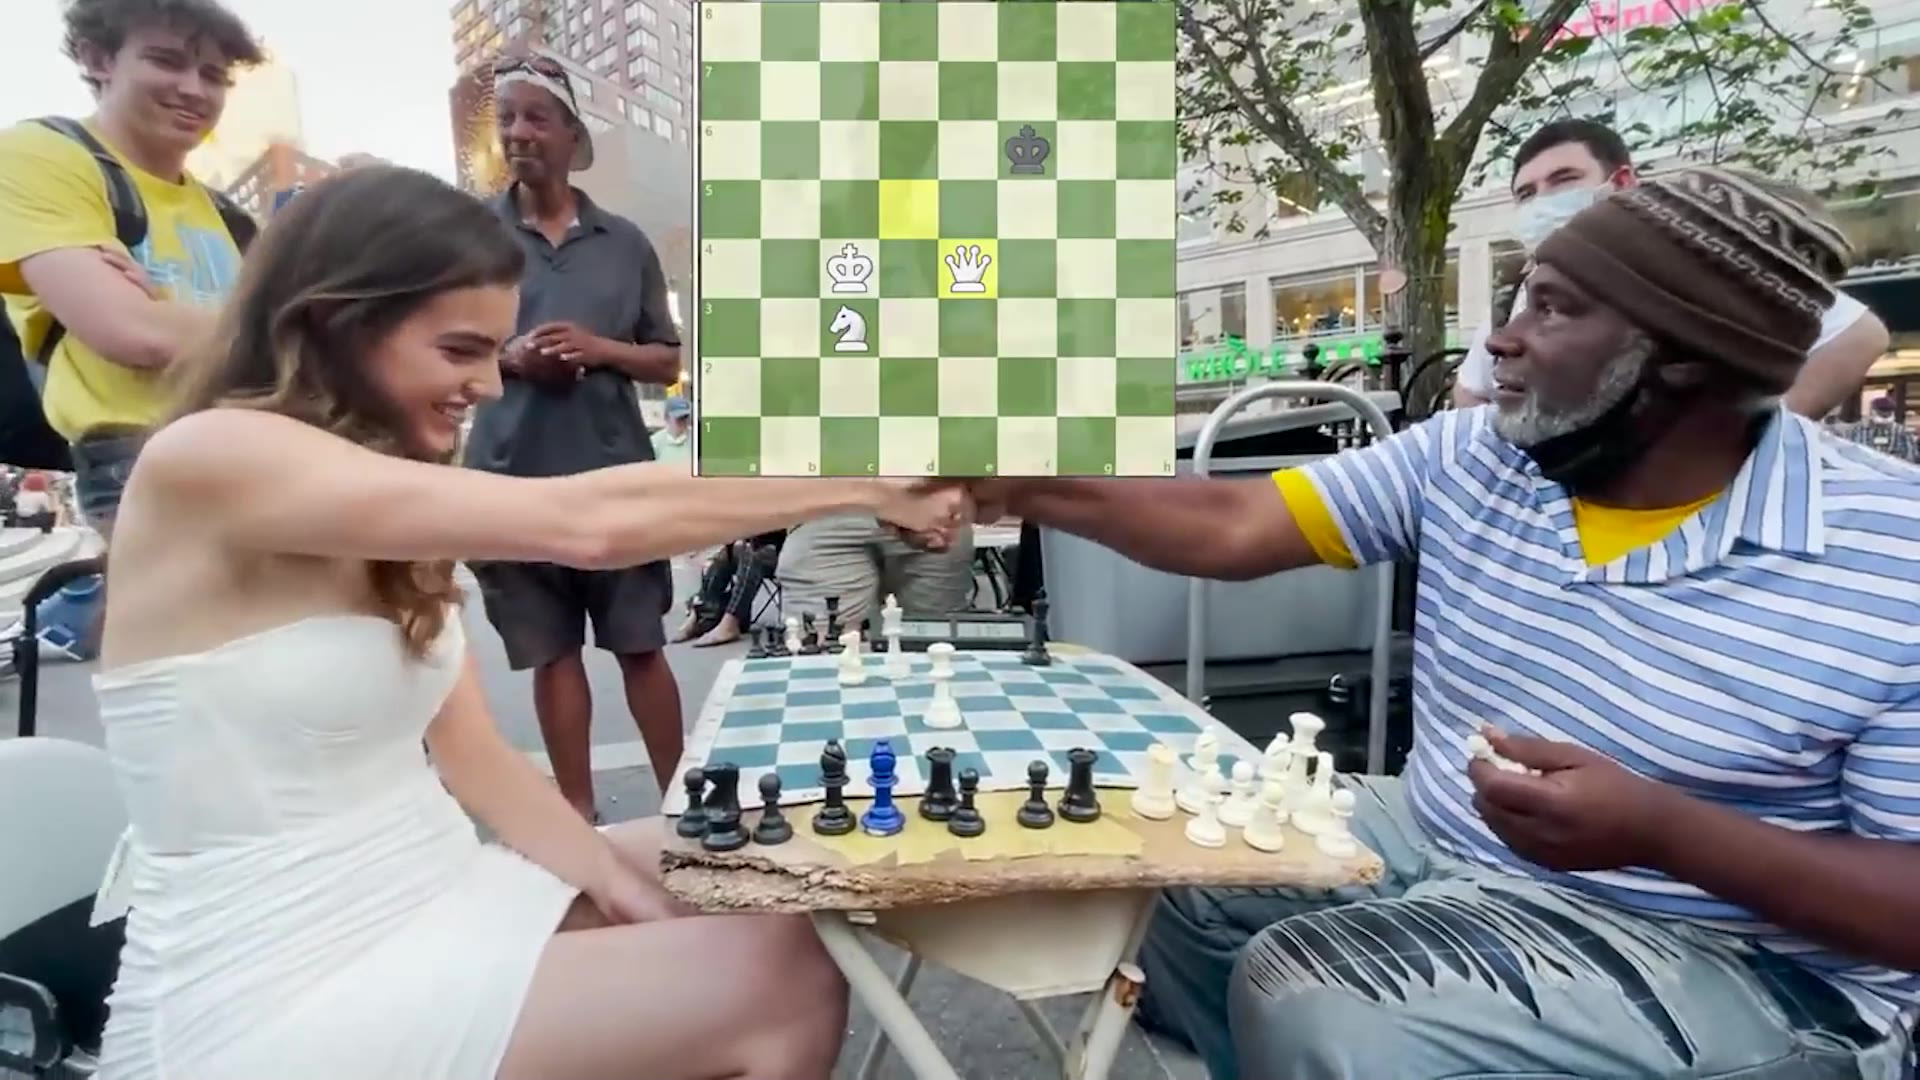 The real Queen's Gambit: Meet the chess master fighting for the women's game  - CNET